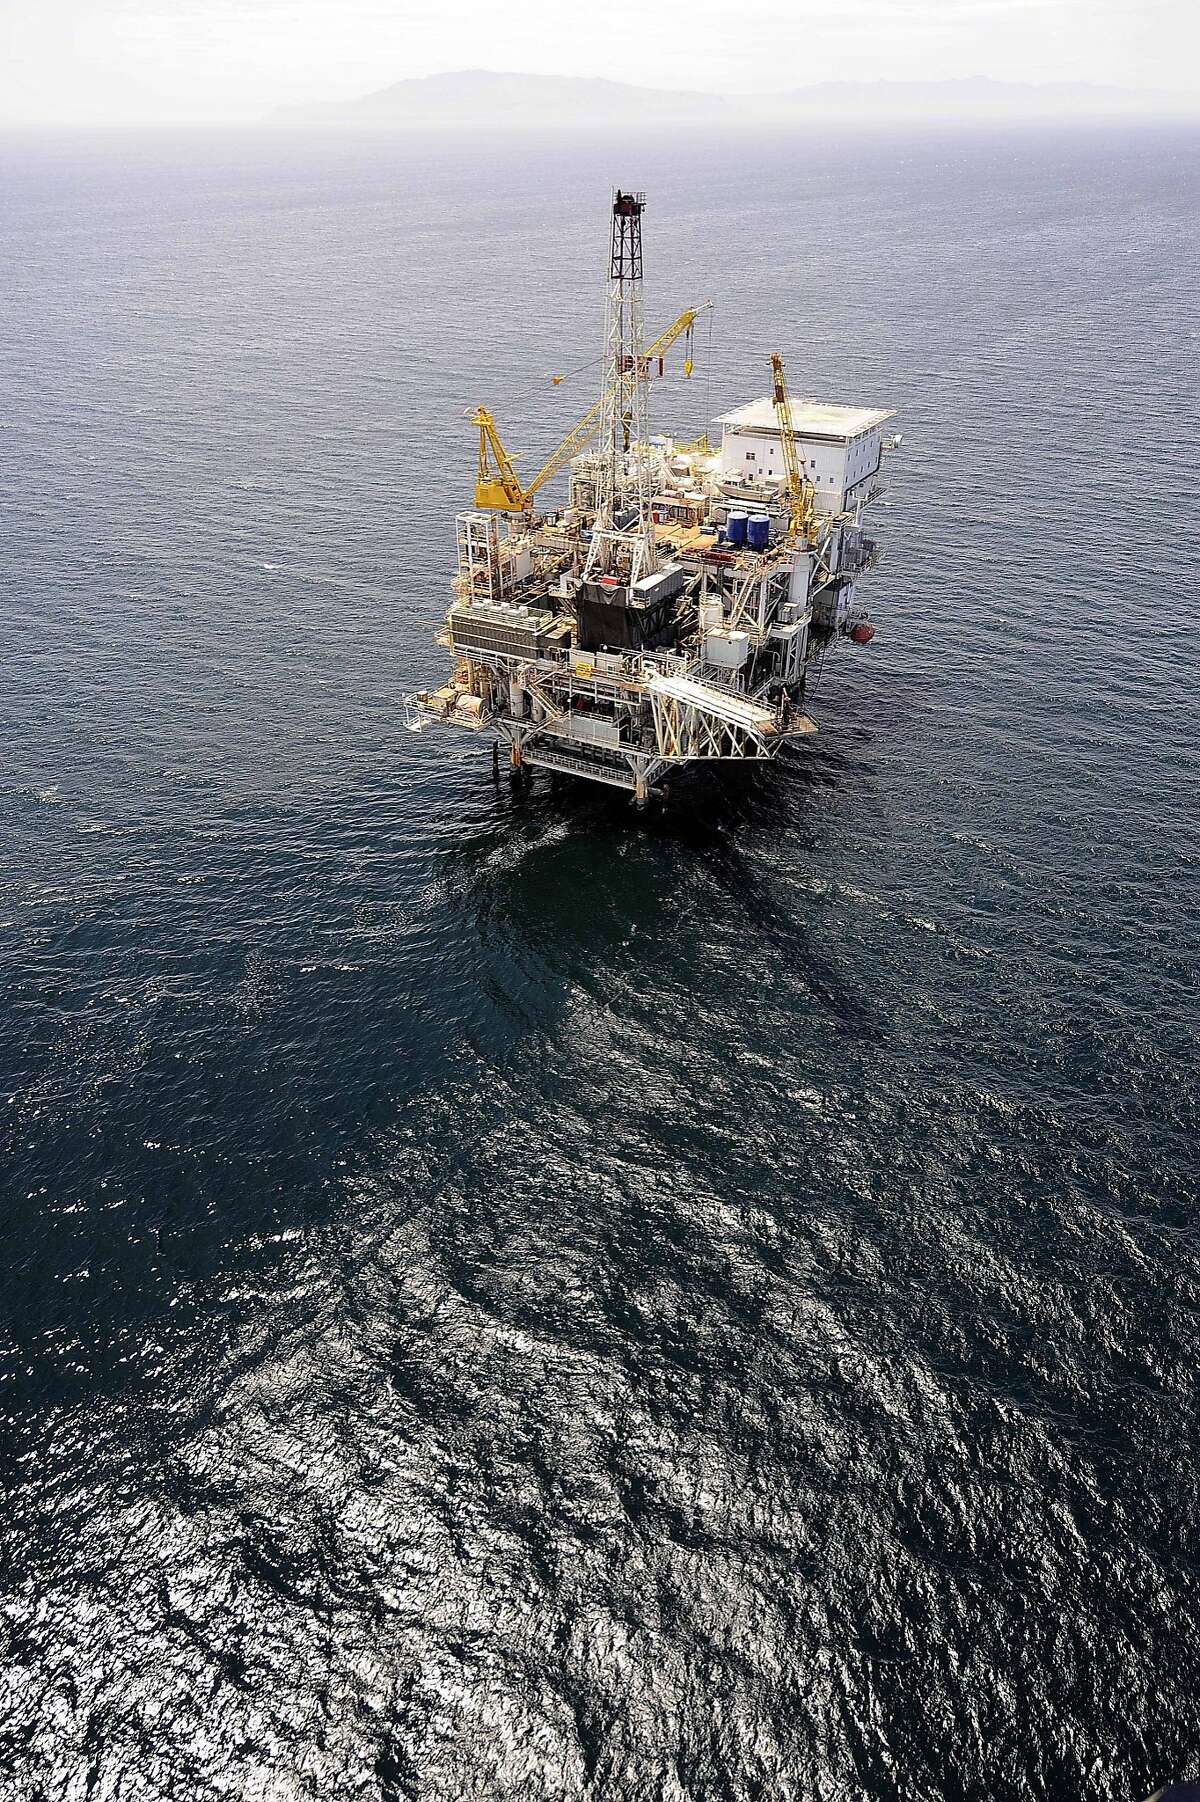 FILE - In this photo taken Friday, May 1, 2009, offshore oil drilling platform "Gail," operated by Venoco, Inc., is seen off the coast of California near Santa Barbara. Nearly two years ago, a broad coalition of environmental groups celebrated a deal with a Texas oil company that promised to eventually end its drilling operations off California's scenic Santa Barbara County coast. Now, a growing number of those eco allies are lining up against the plan, after it became clear that no one outside a small circle of supporters would be allowed to read the final agreement. (AP Photo/Chris Carlson)